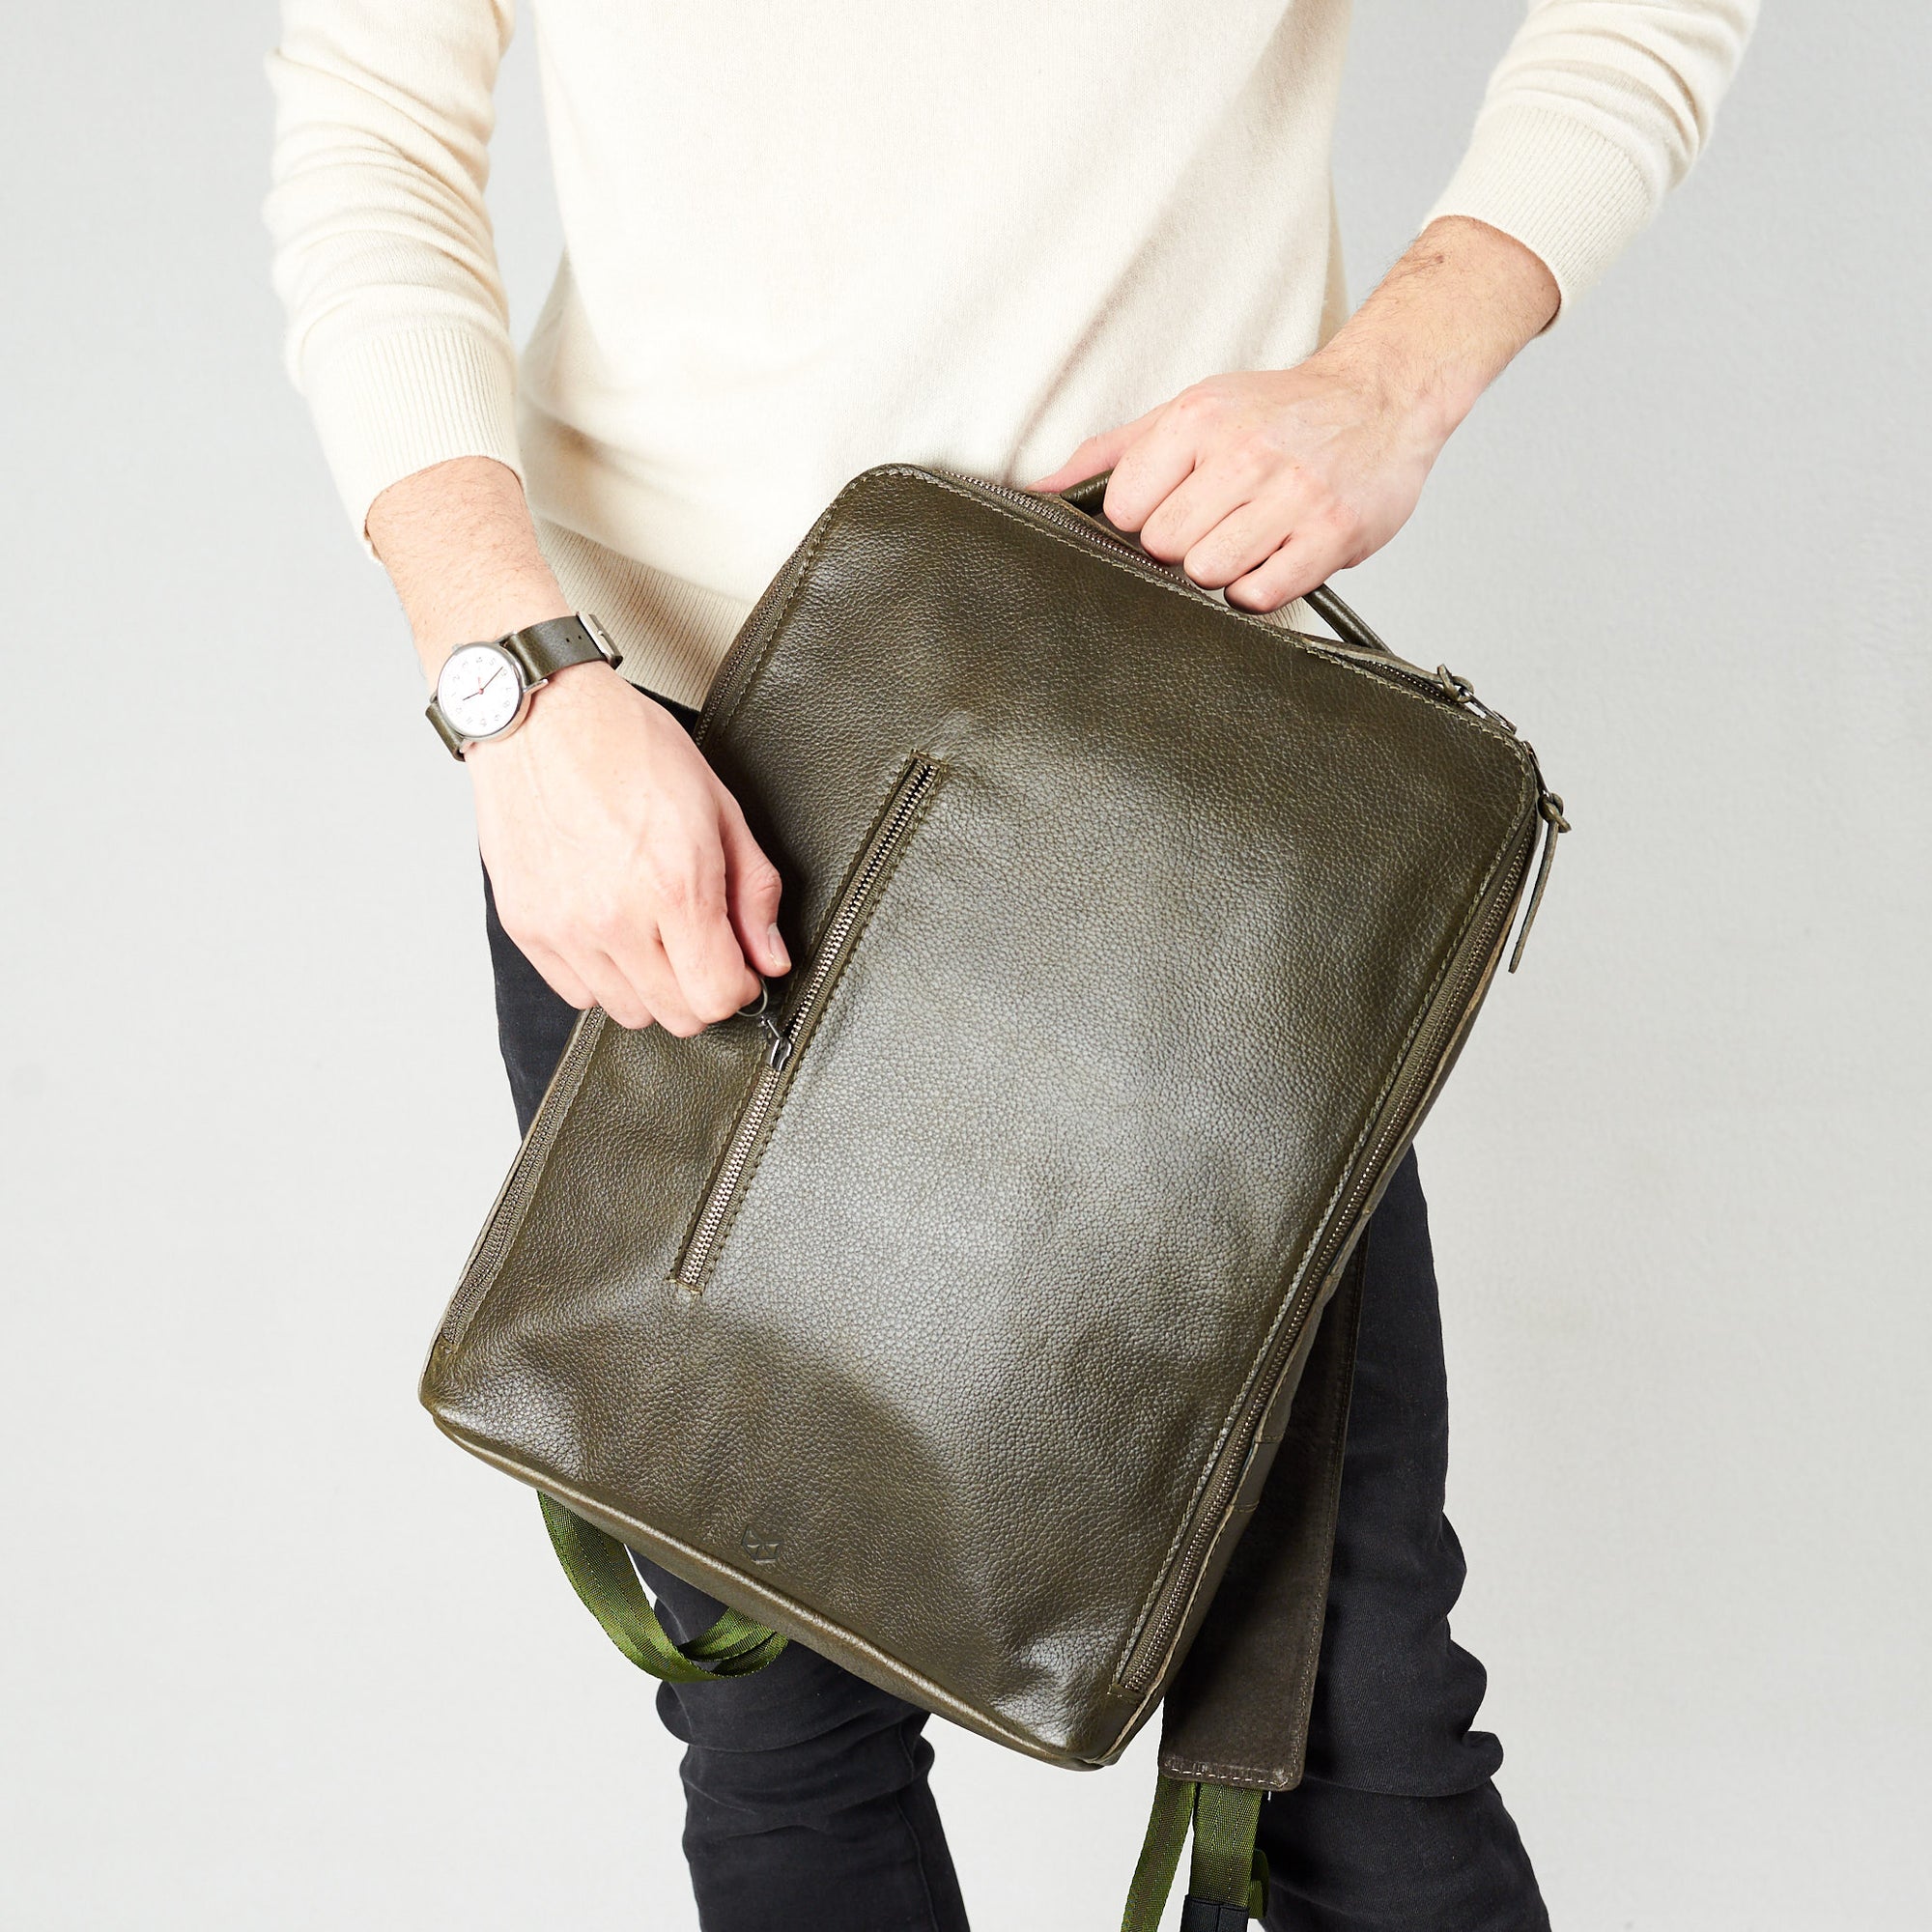 professional backpack for work green by capra leather